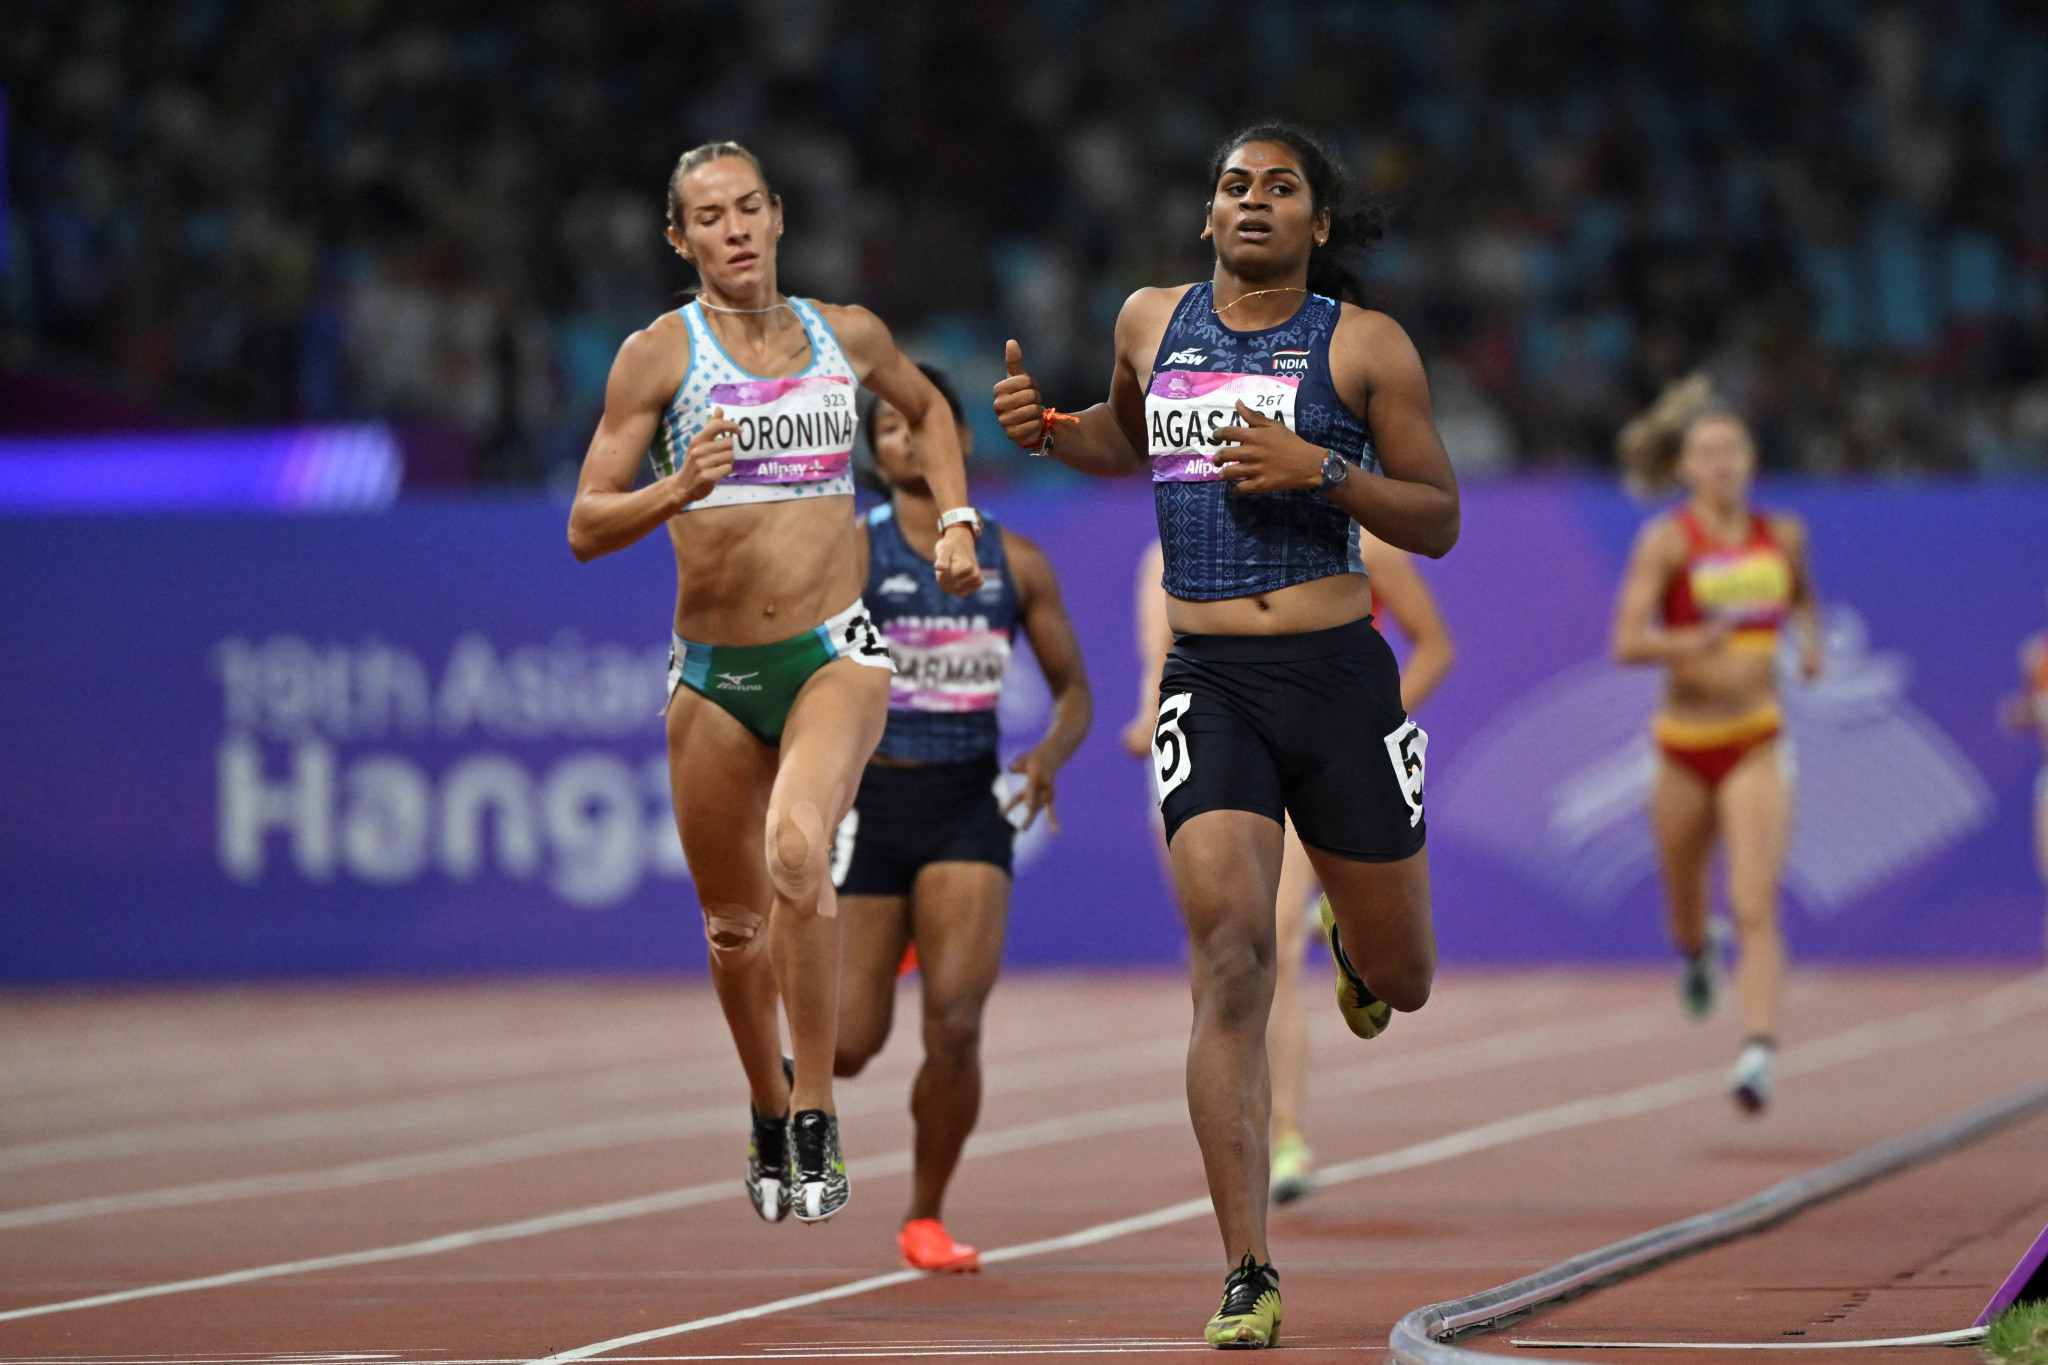 Nandini Agasara, right, won the heptathlon's 800m to clinch the overall bronze medal ©Getty Images